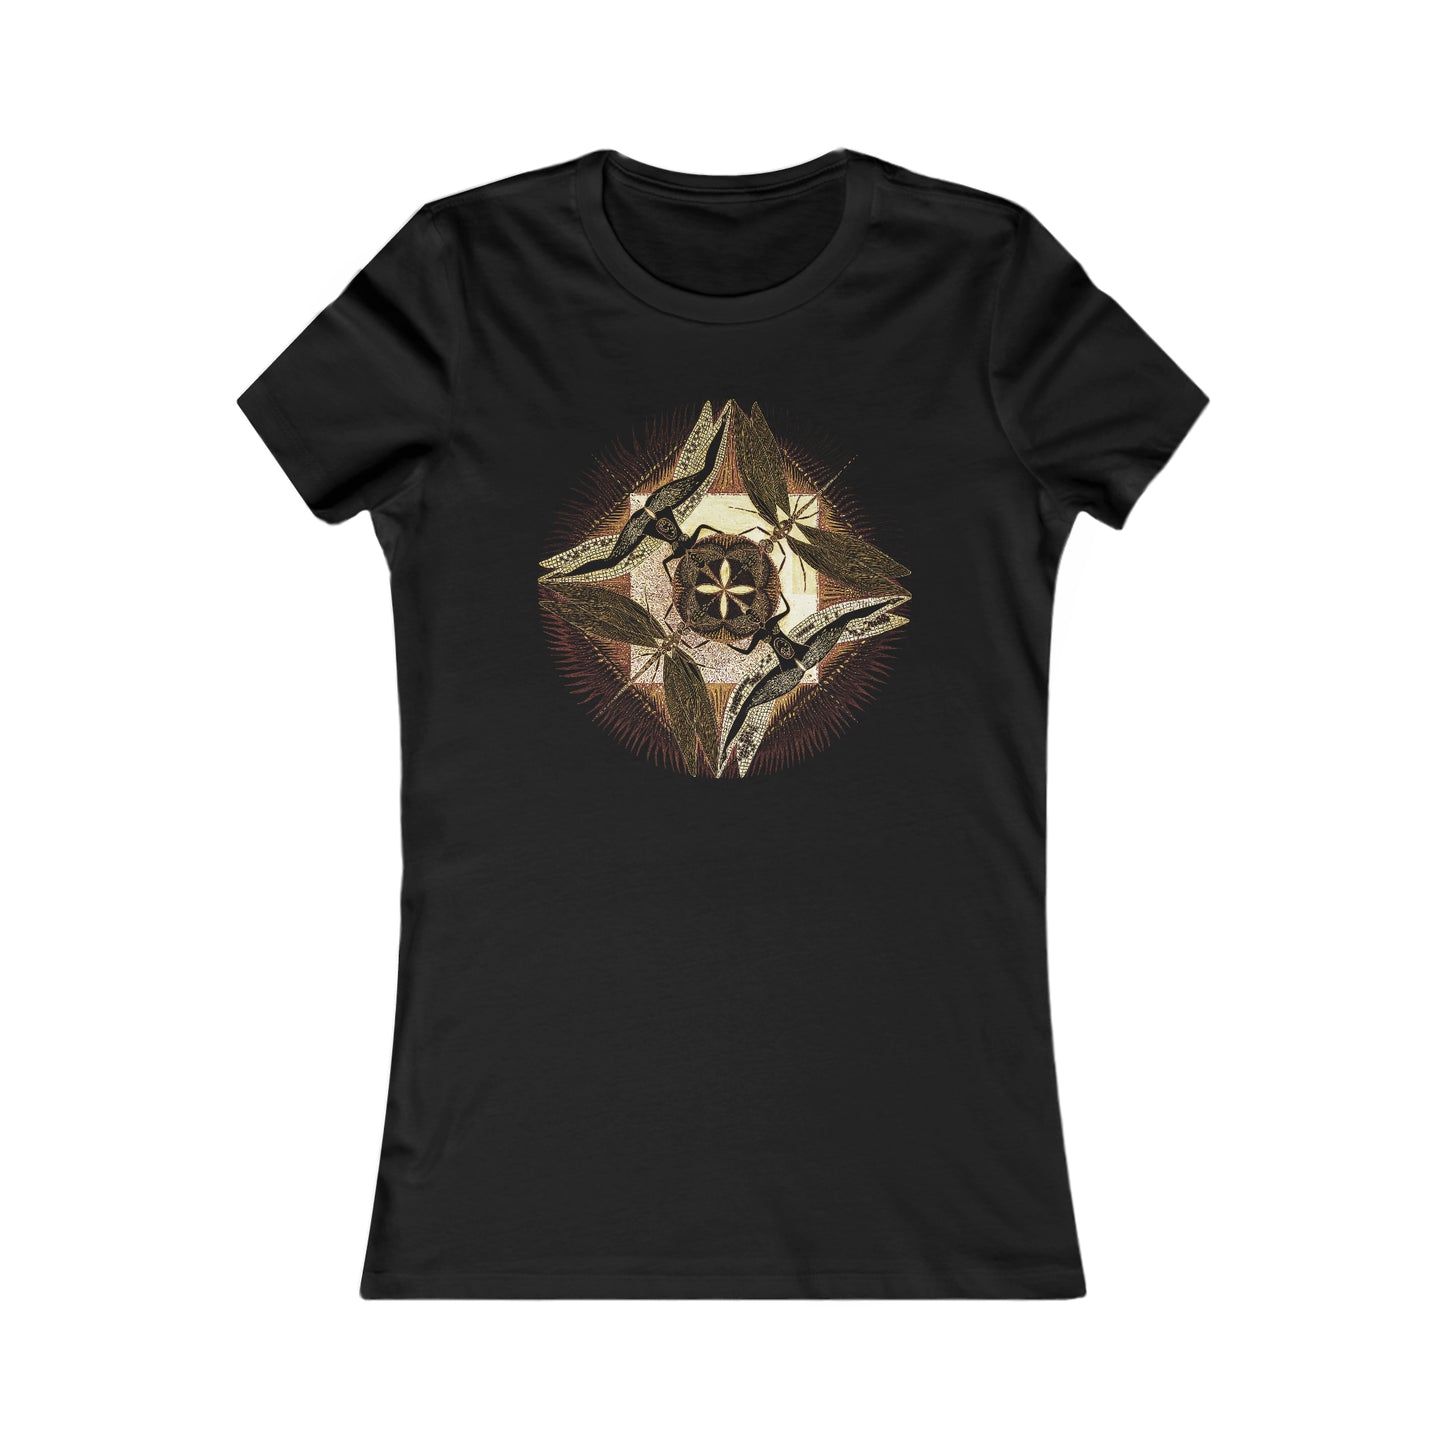 Women's Special Edition "DragonFly" Slim Fit Black Orange Colors Tee